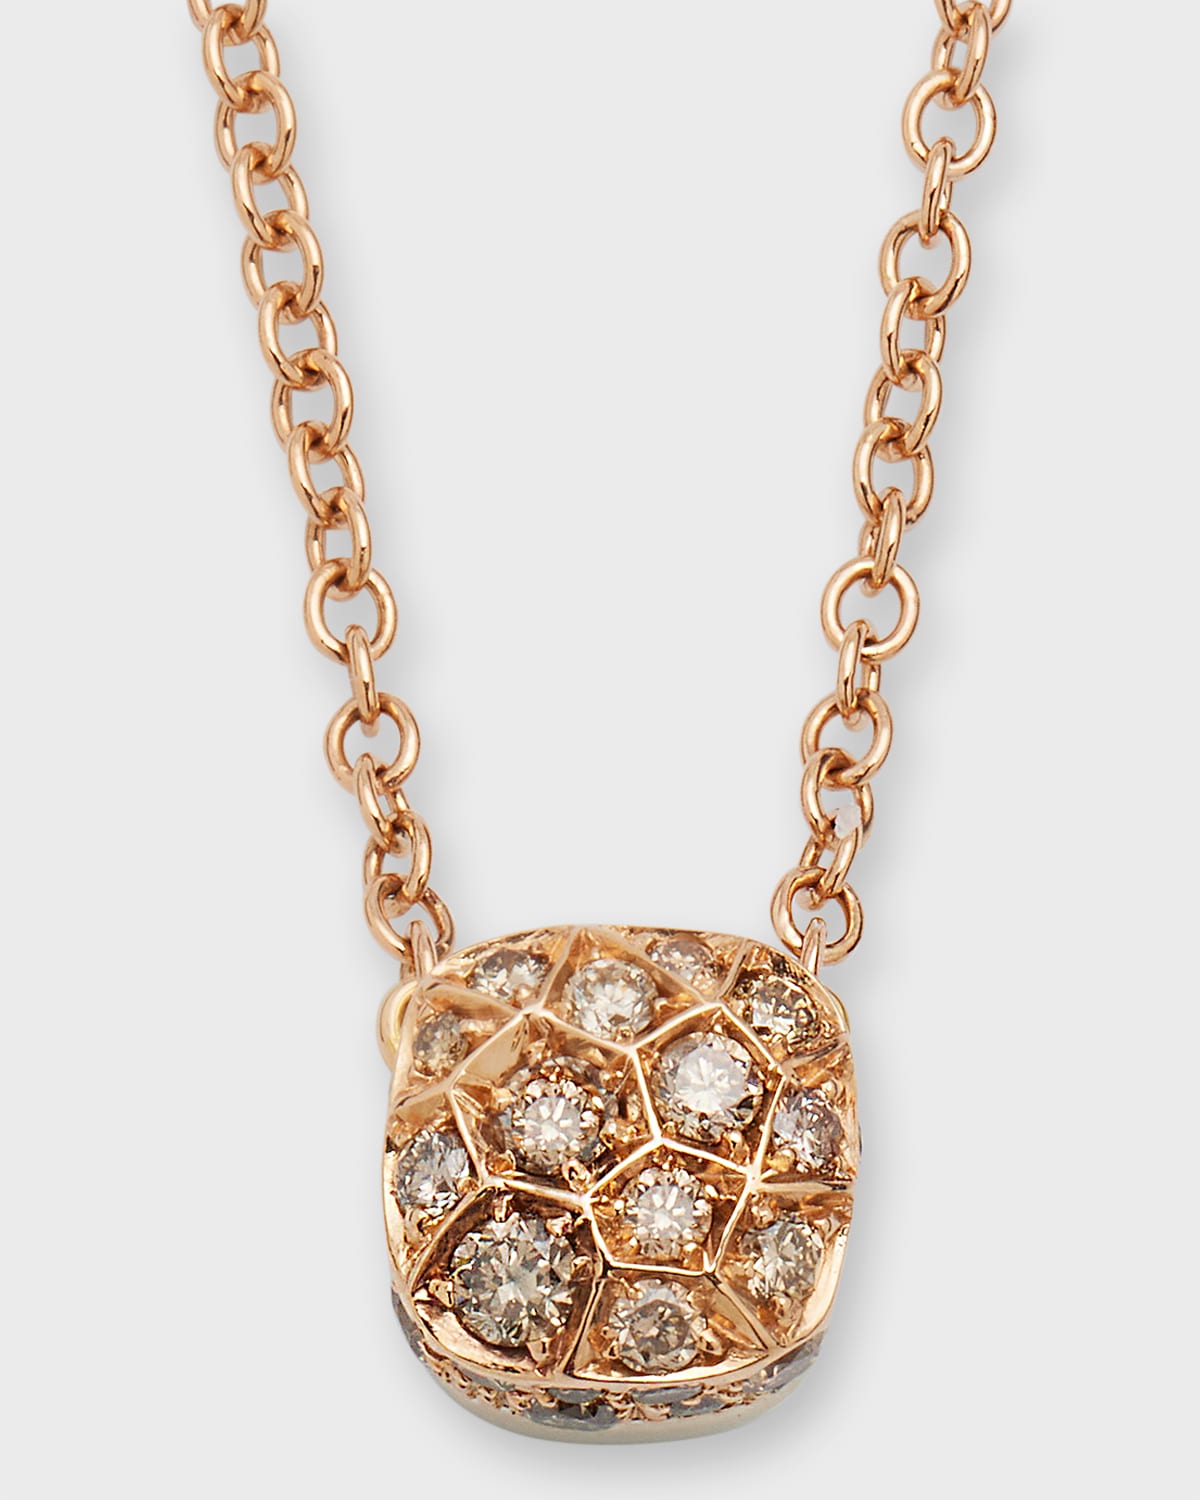 Nudo Petit Necklace in 18K Rose and White Gold with Brown Diamonds